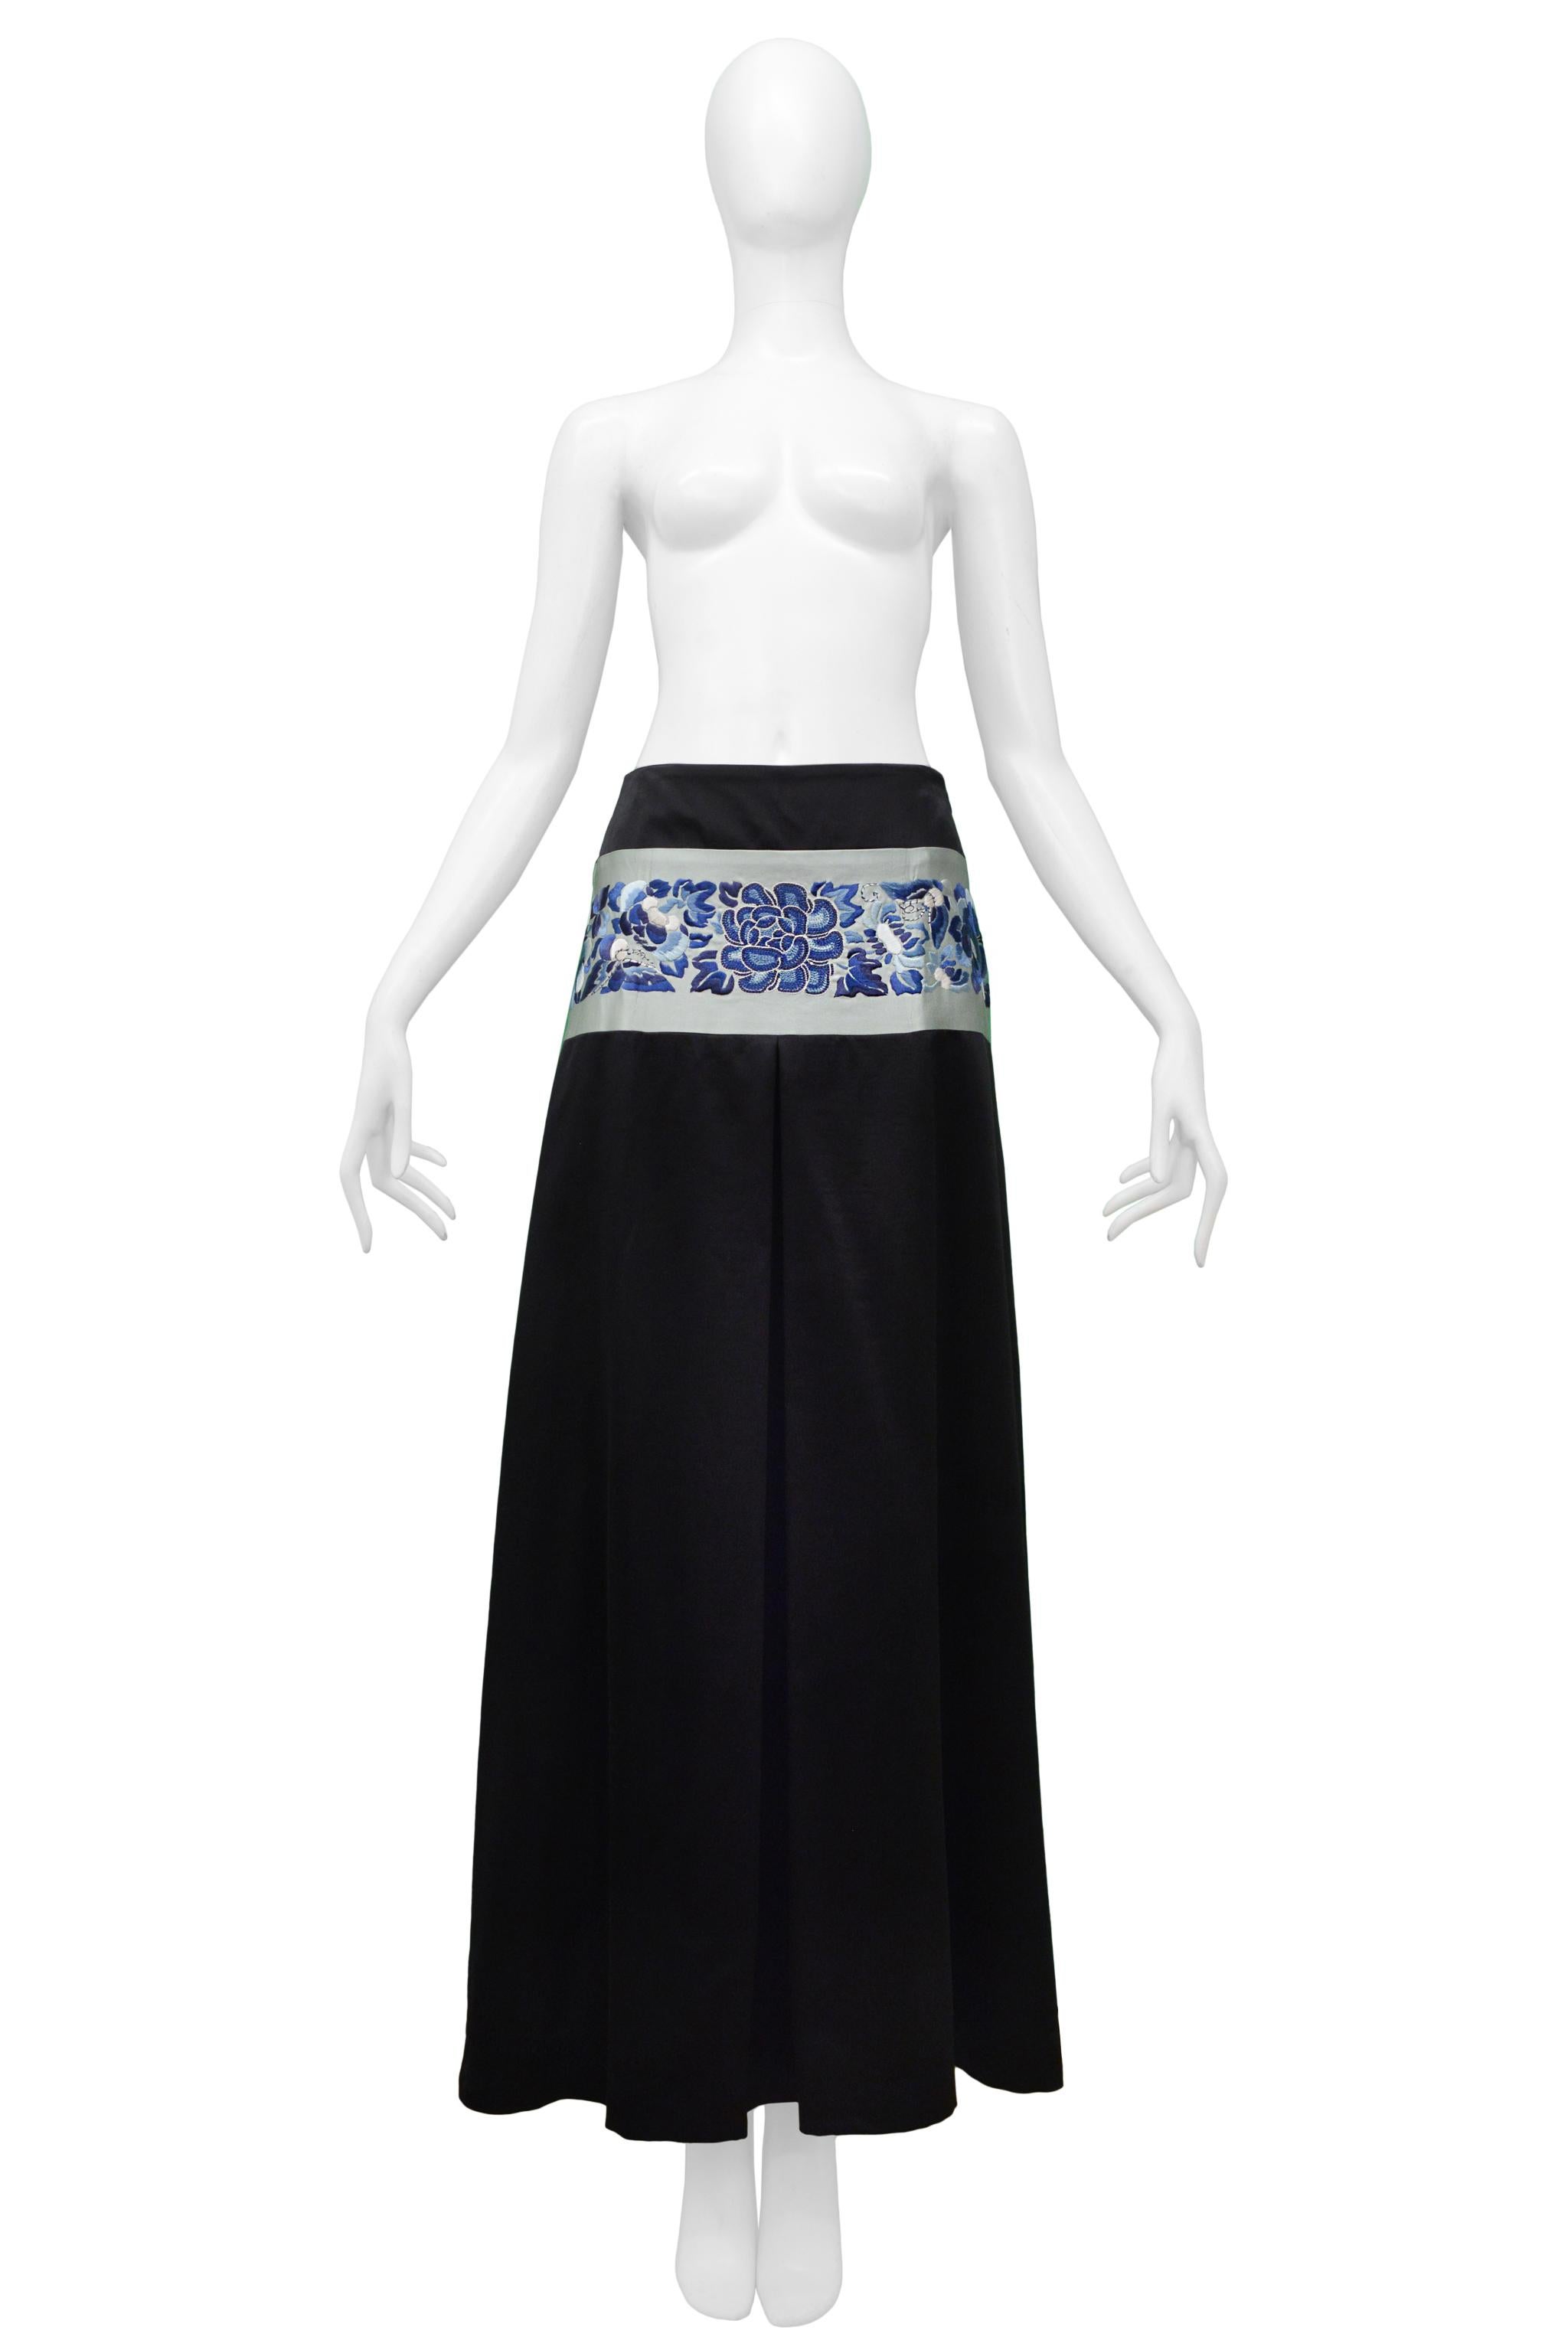 Resurrection Vintage is pleased to offer a vintage John Galliano black satin maxi skirt featuring large pleats and a blue floral Asian-inspired embroidered waistband.

John Galliano 
Size 6 or F40
Wool And Silk 
Excellent Vintage Condition